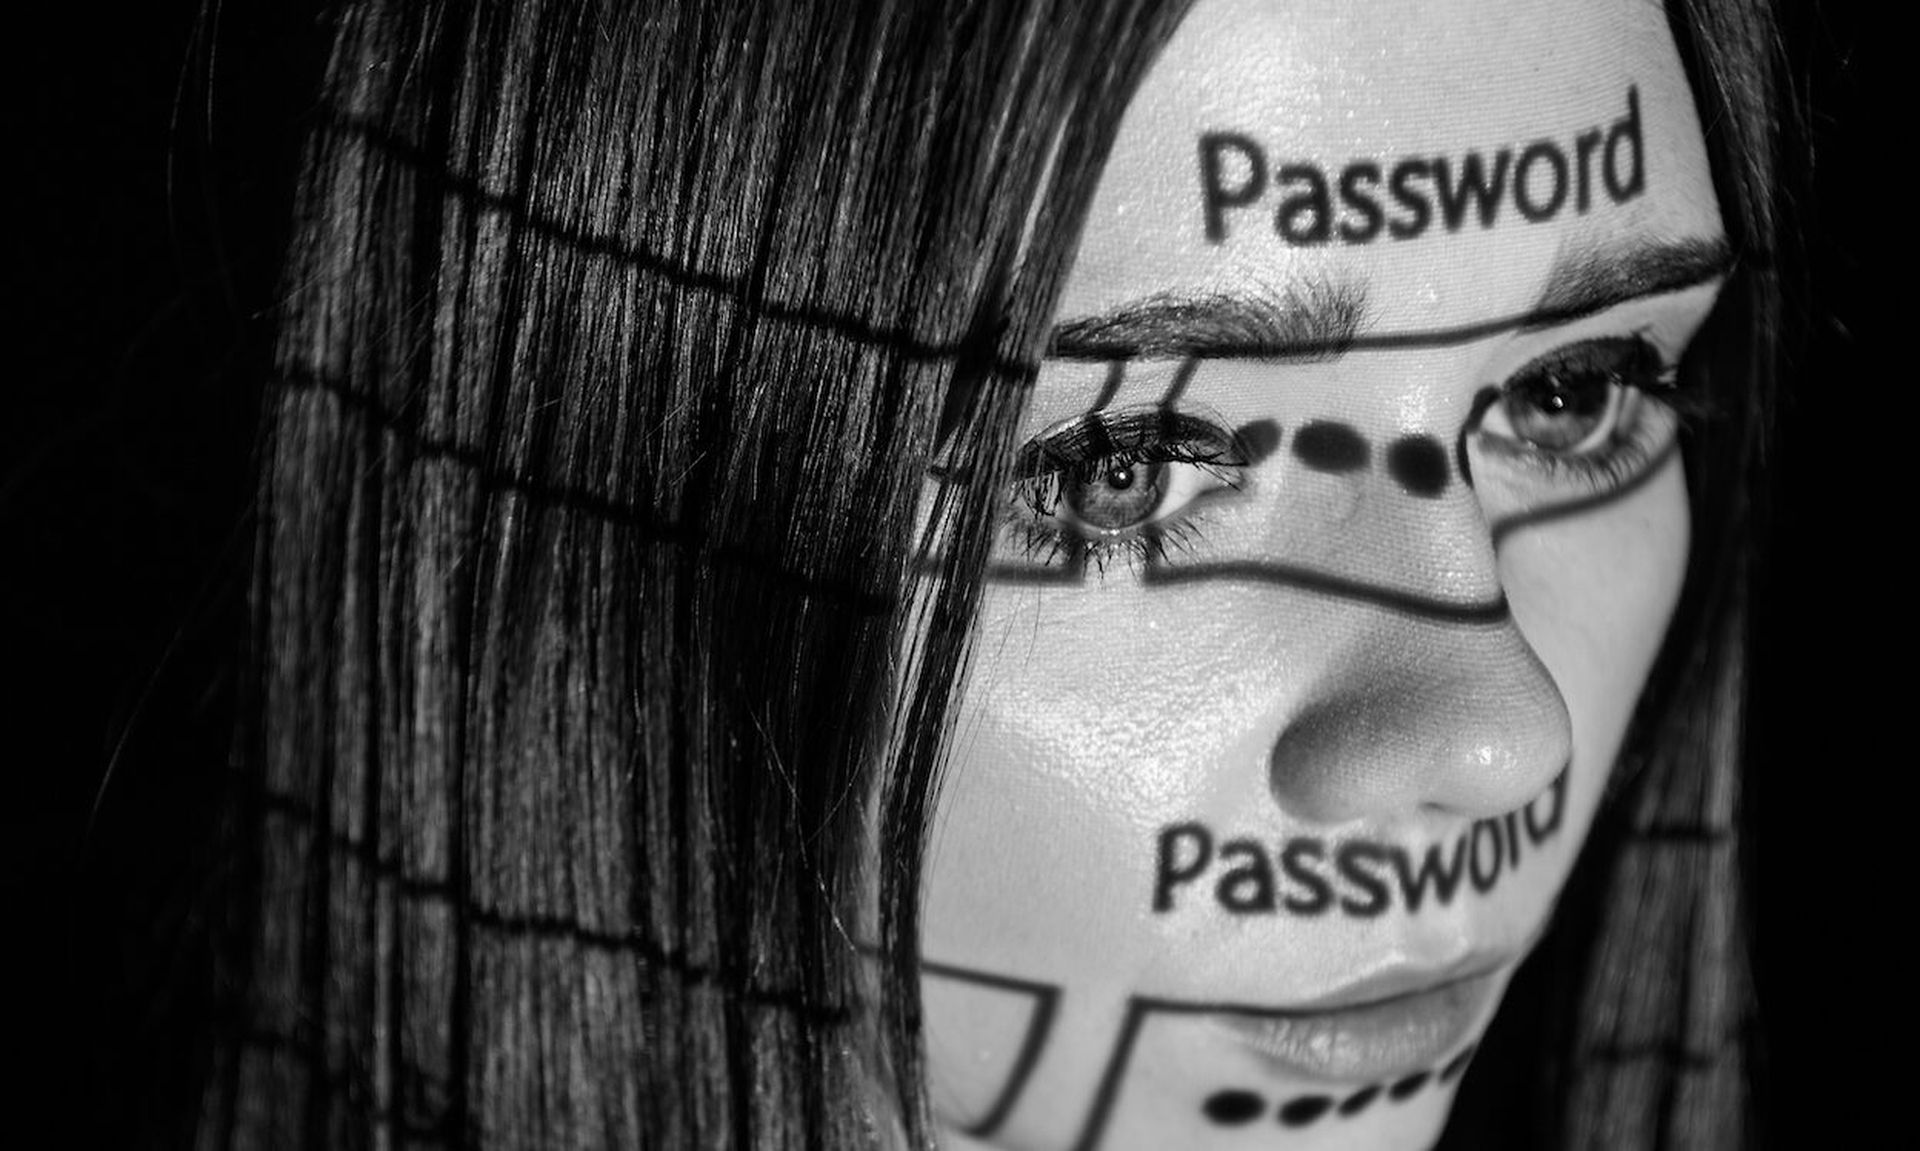 Today’s columnist, consultant David Strom, writes that passkeys may solve the industry’s dependency on passwords. Only time will tell. (Photo by Leon Neal/Getty Images)